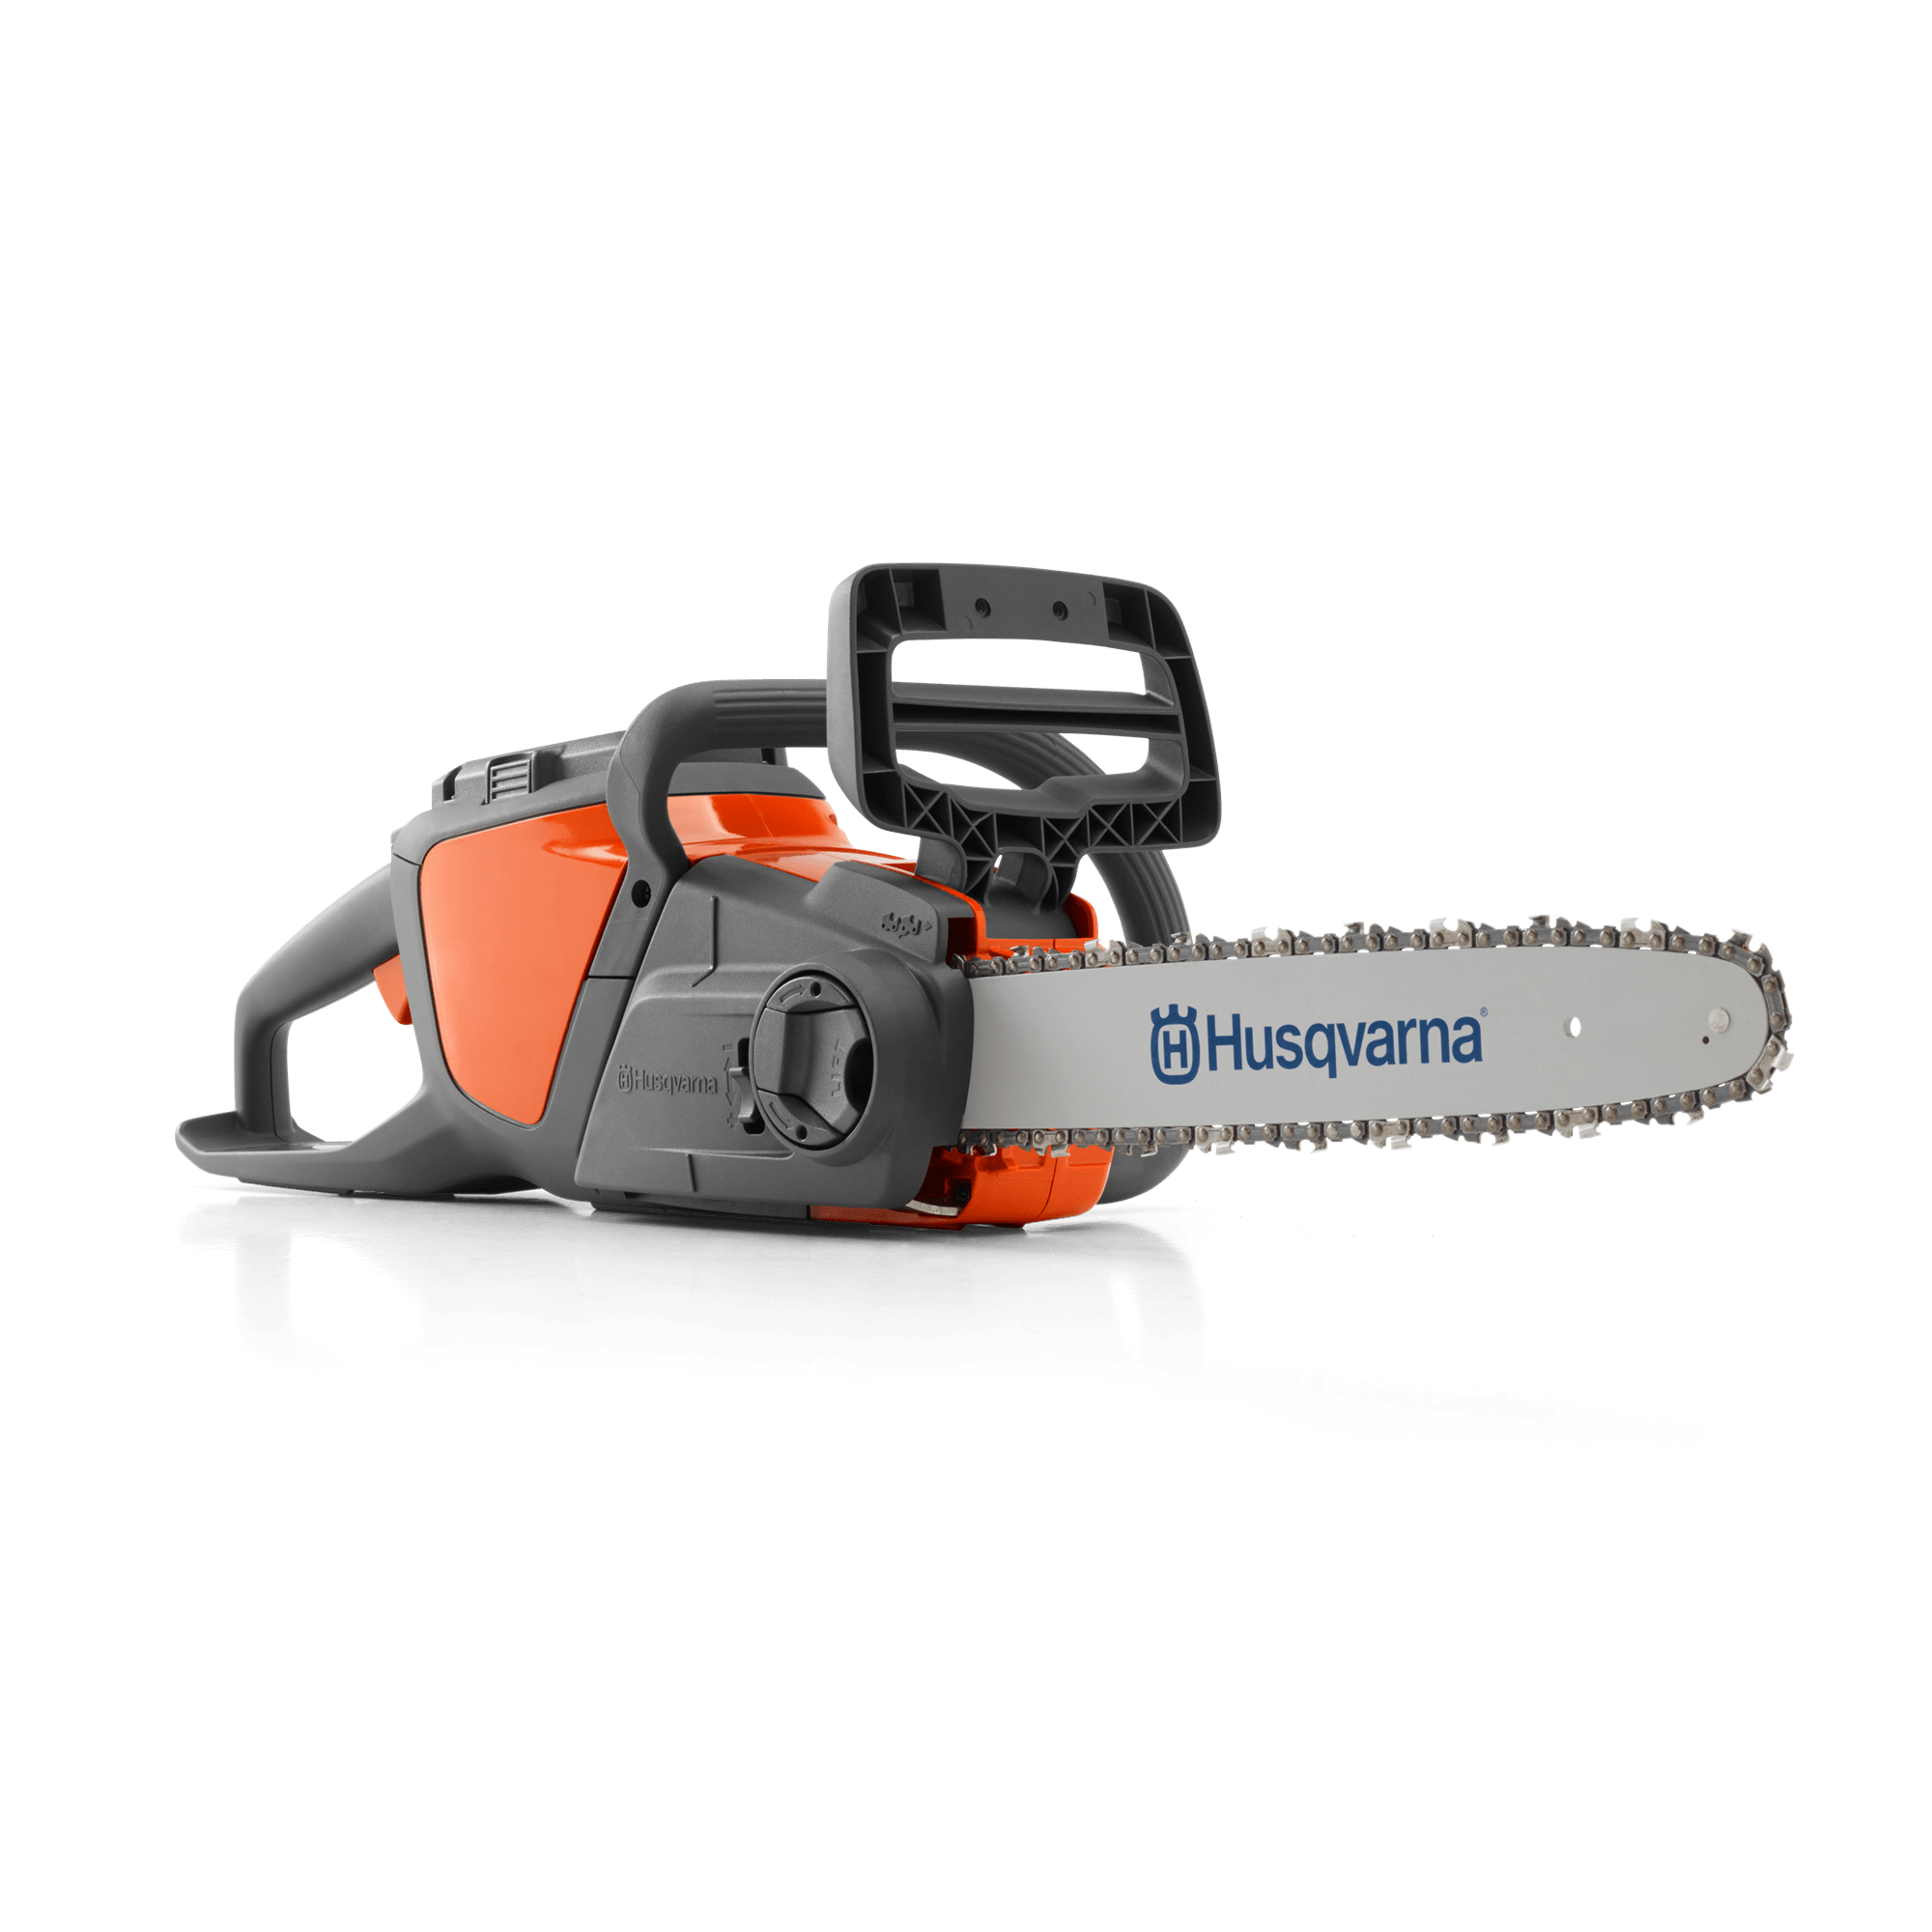 Husqvarna Husqvarna 120i Kit 14", 3/8 pitch, .043 gauge Battery Chainsaw with battery & charger